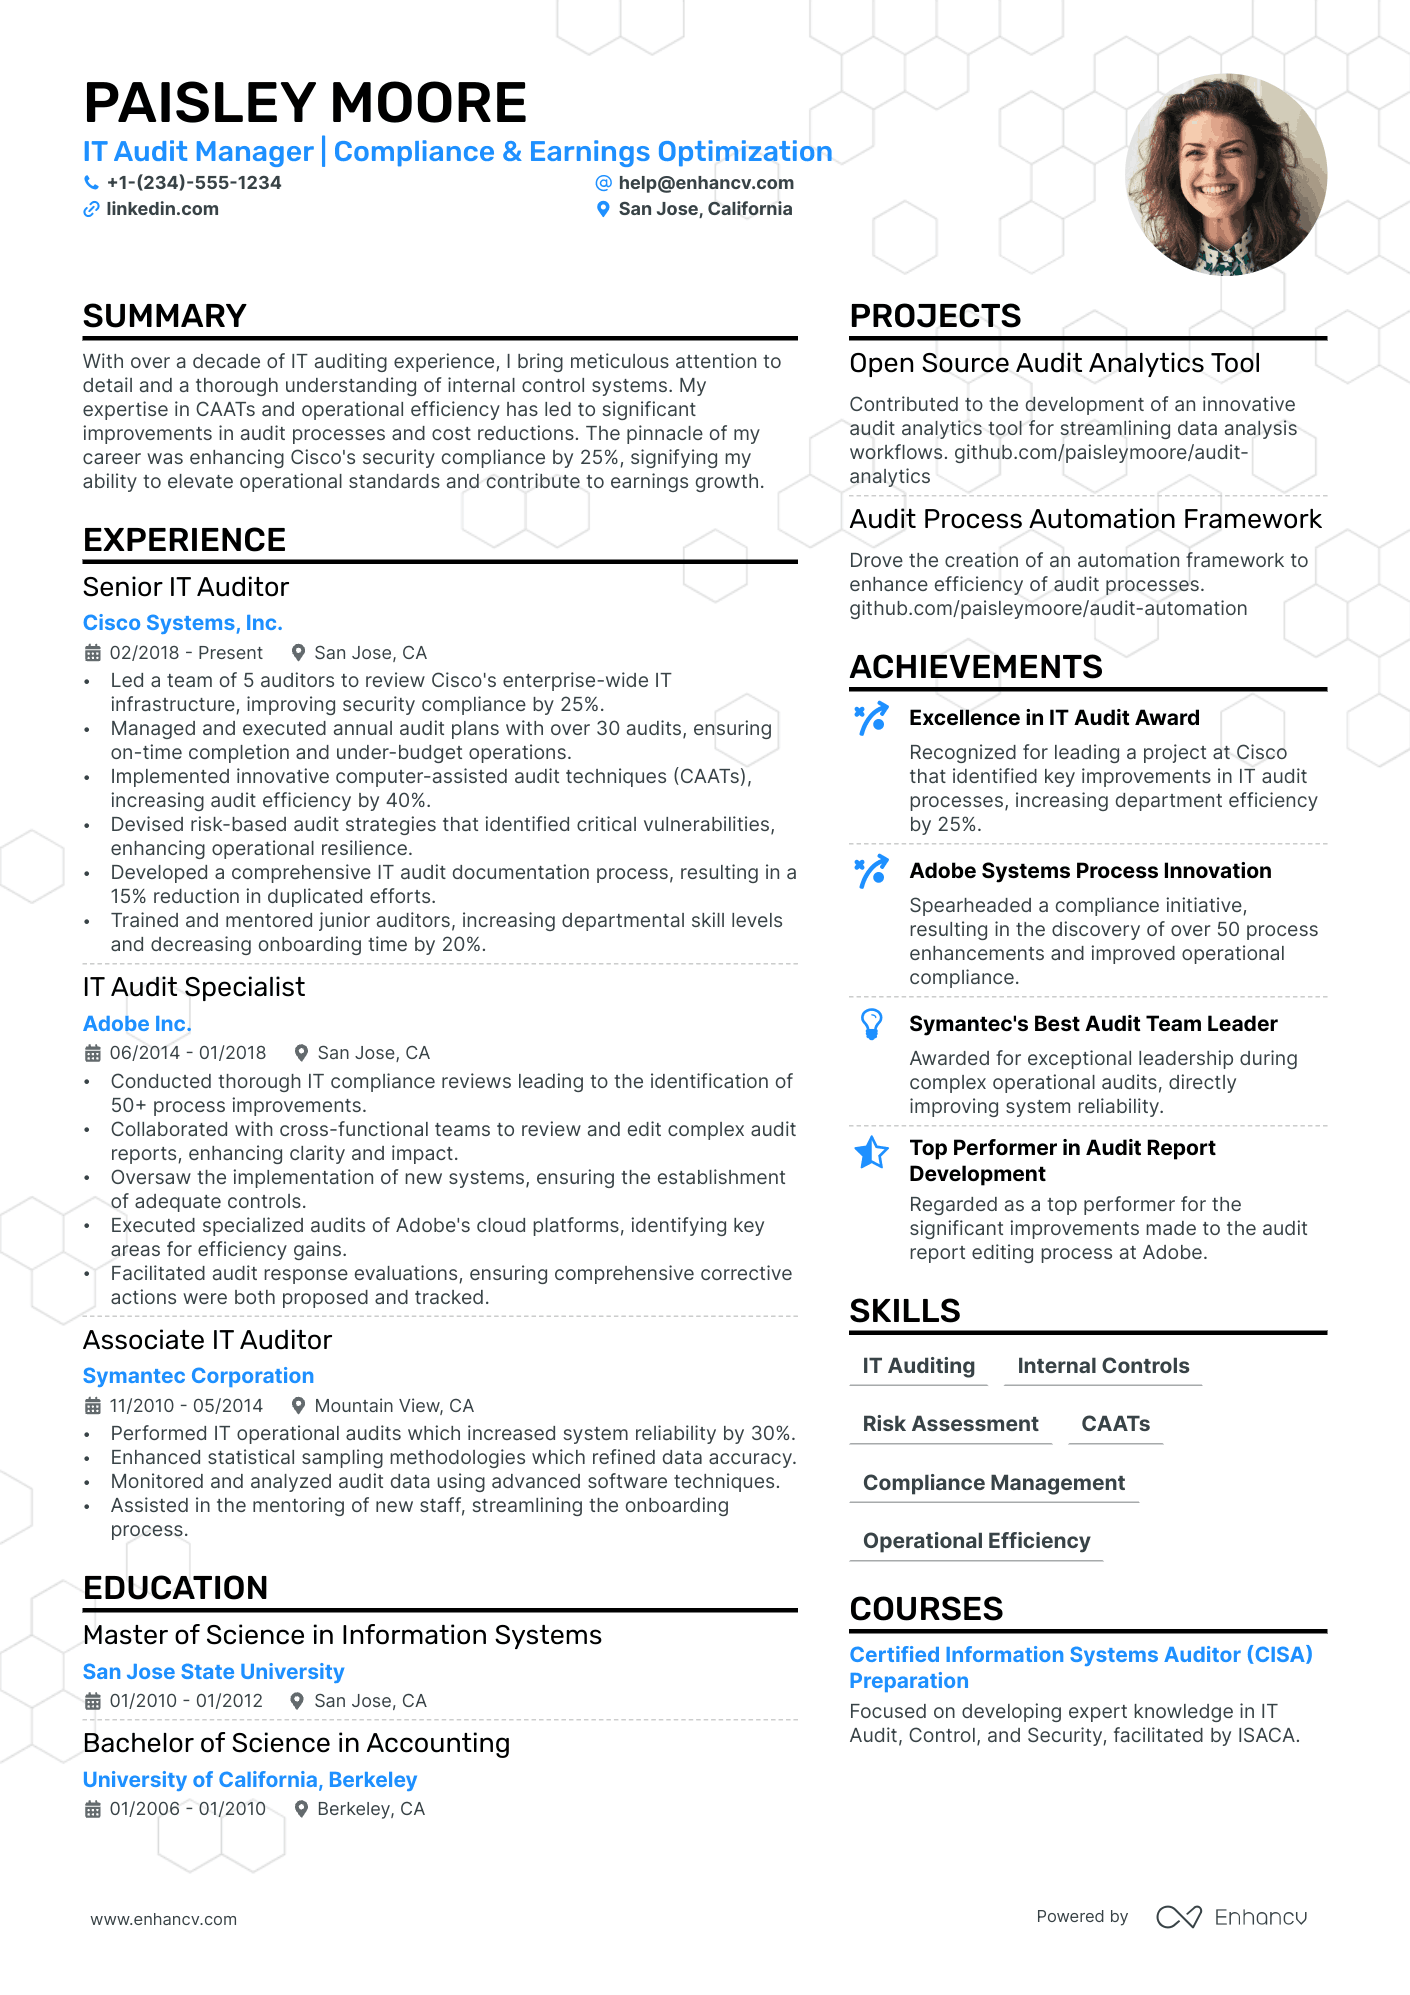 IT Audit Manager resume example